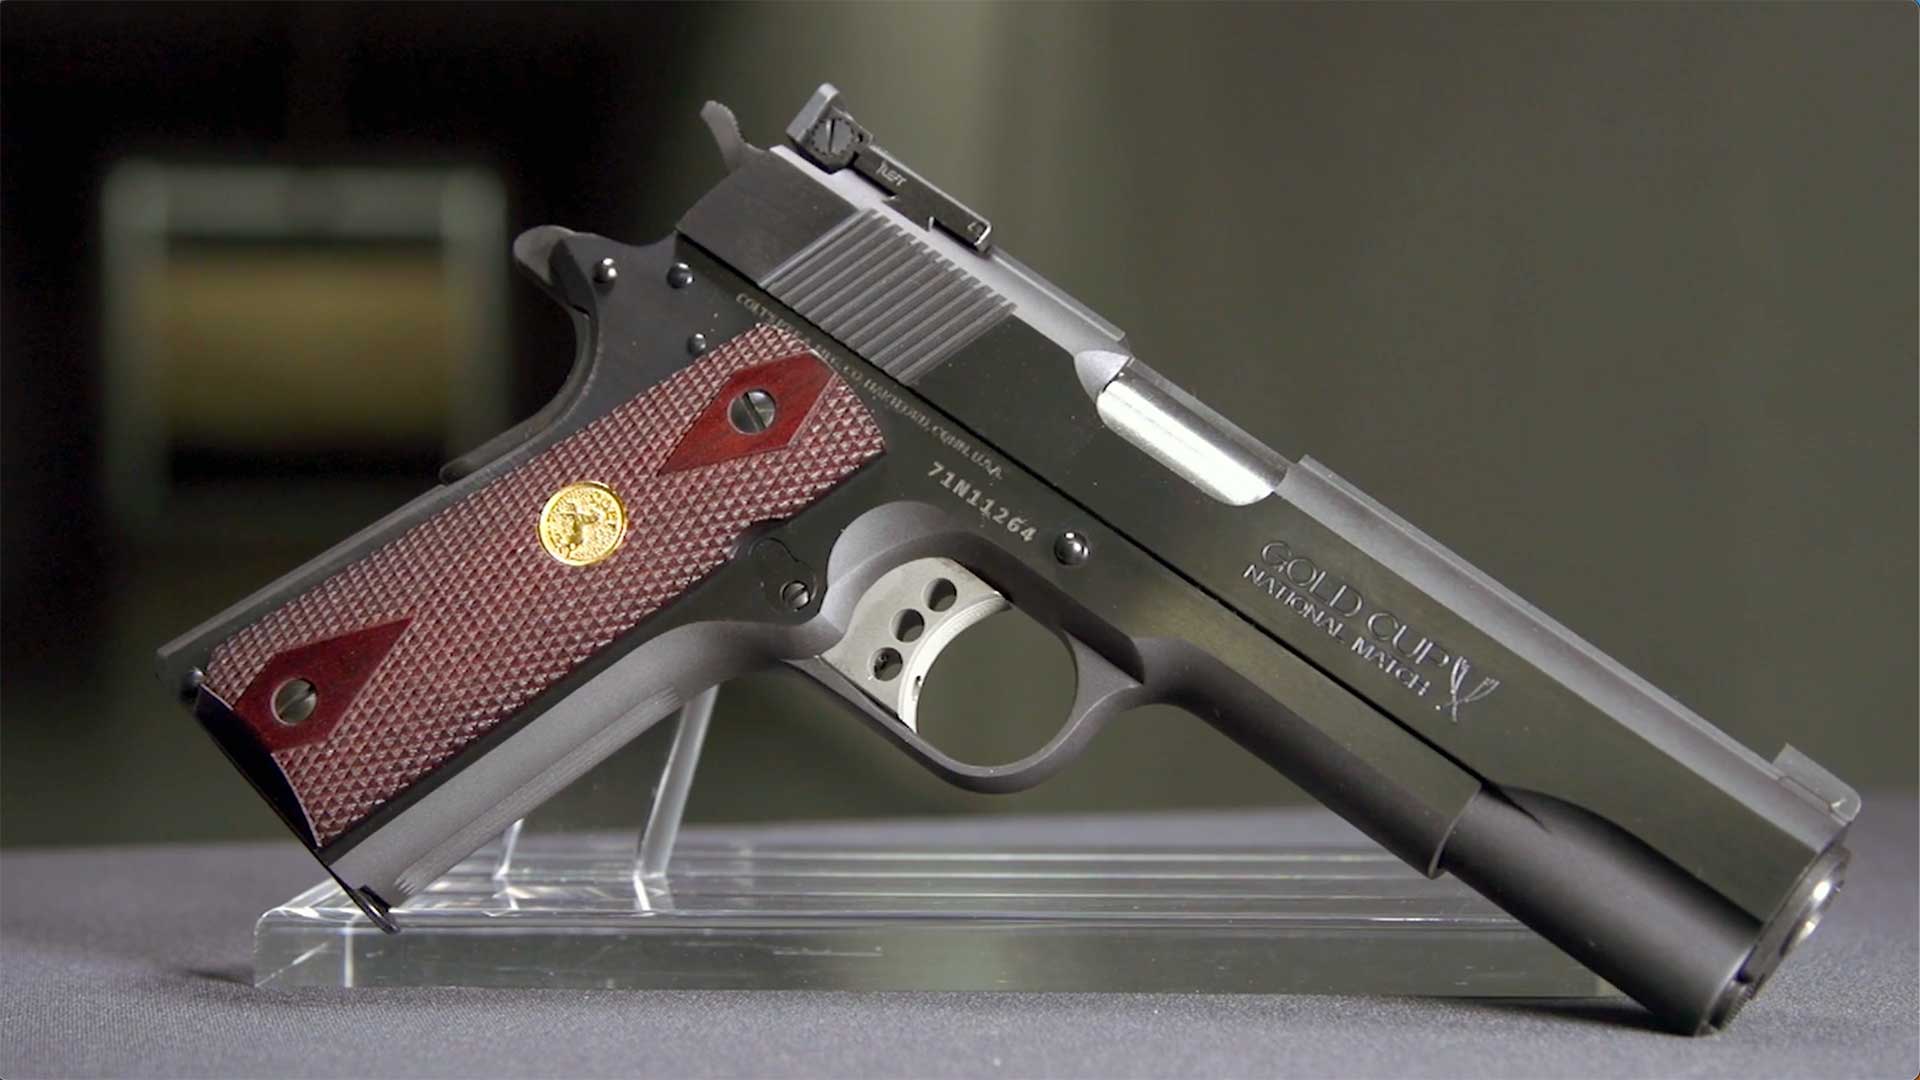 Right side of the Colt Gold Cup National Match M1911.